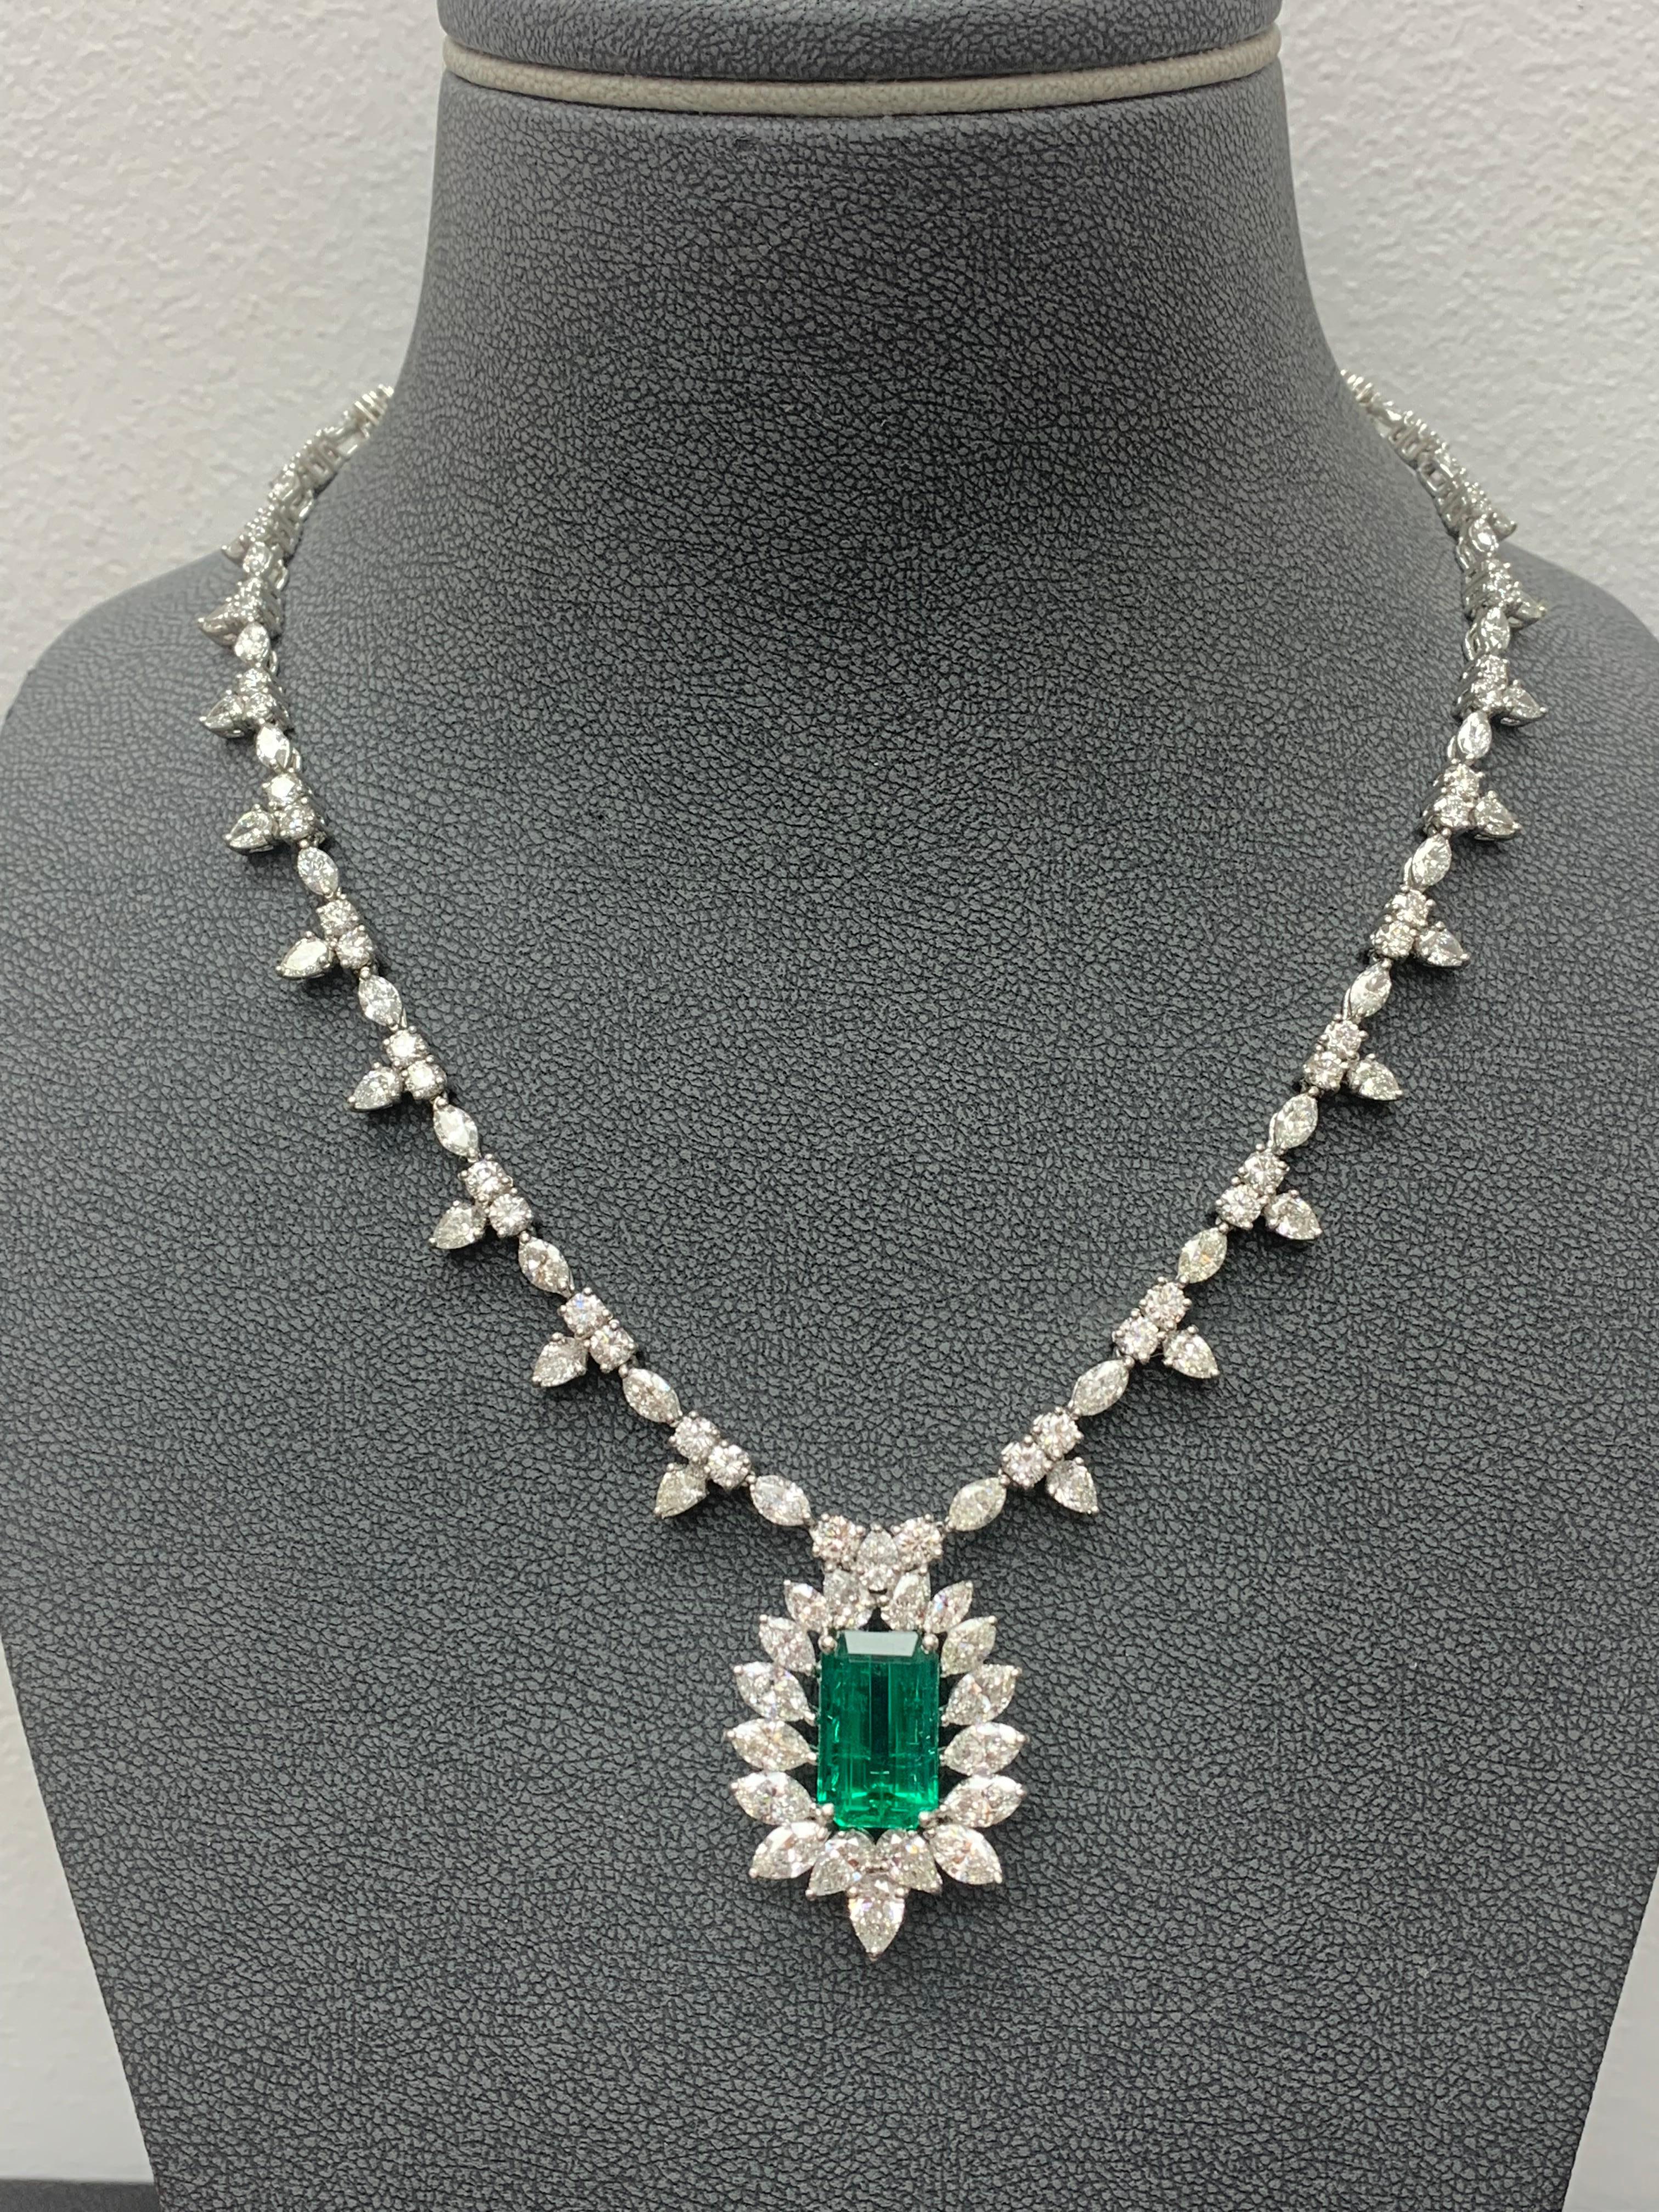 Modern CERTIFIED 8.14 Carat Emerald and Diamond Necklace in Platinum For Sale